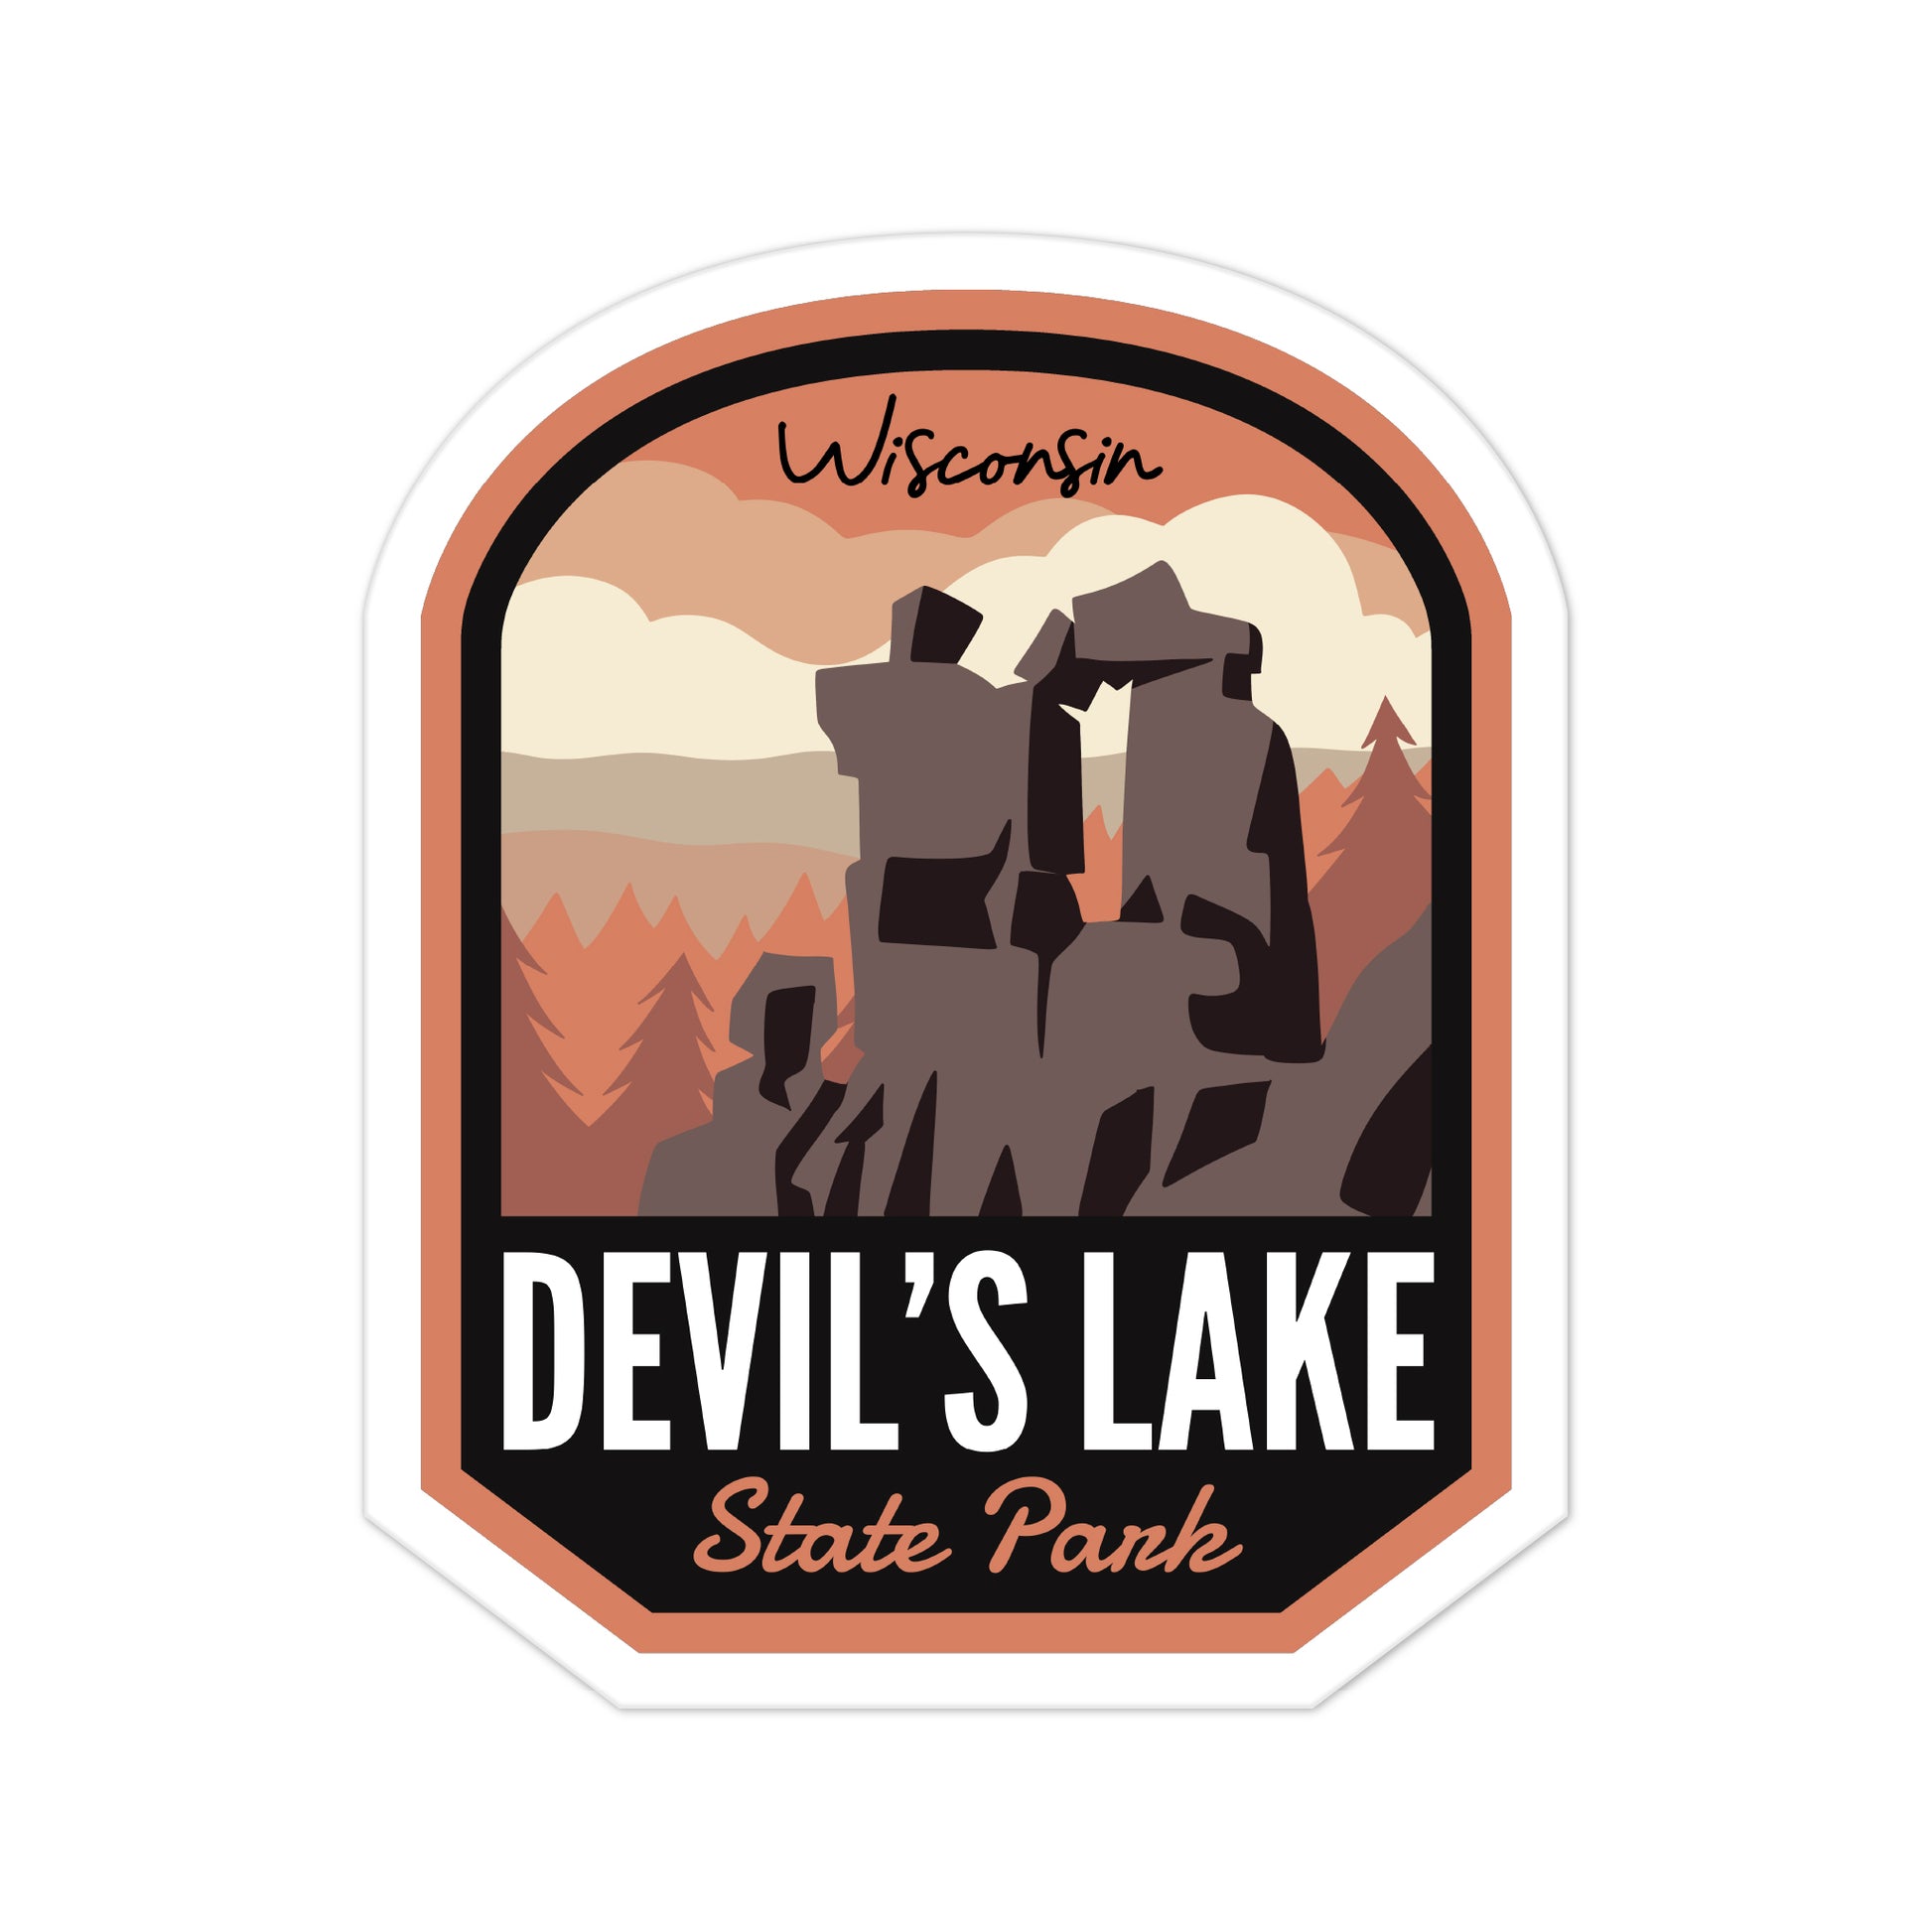 A sticker of Devils Lake State Park